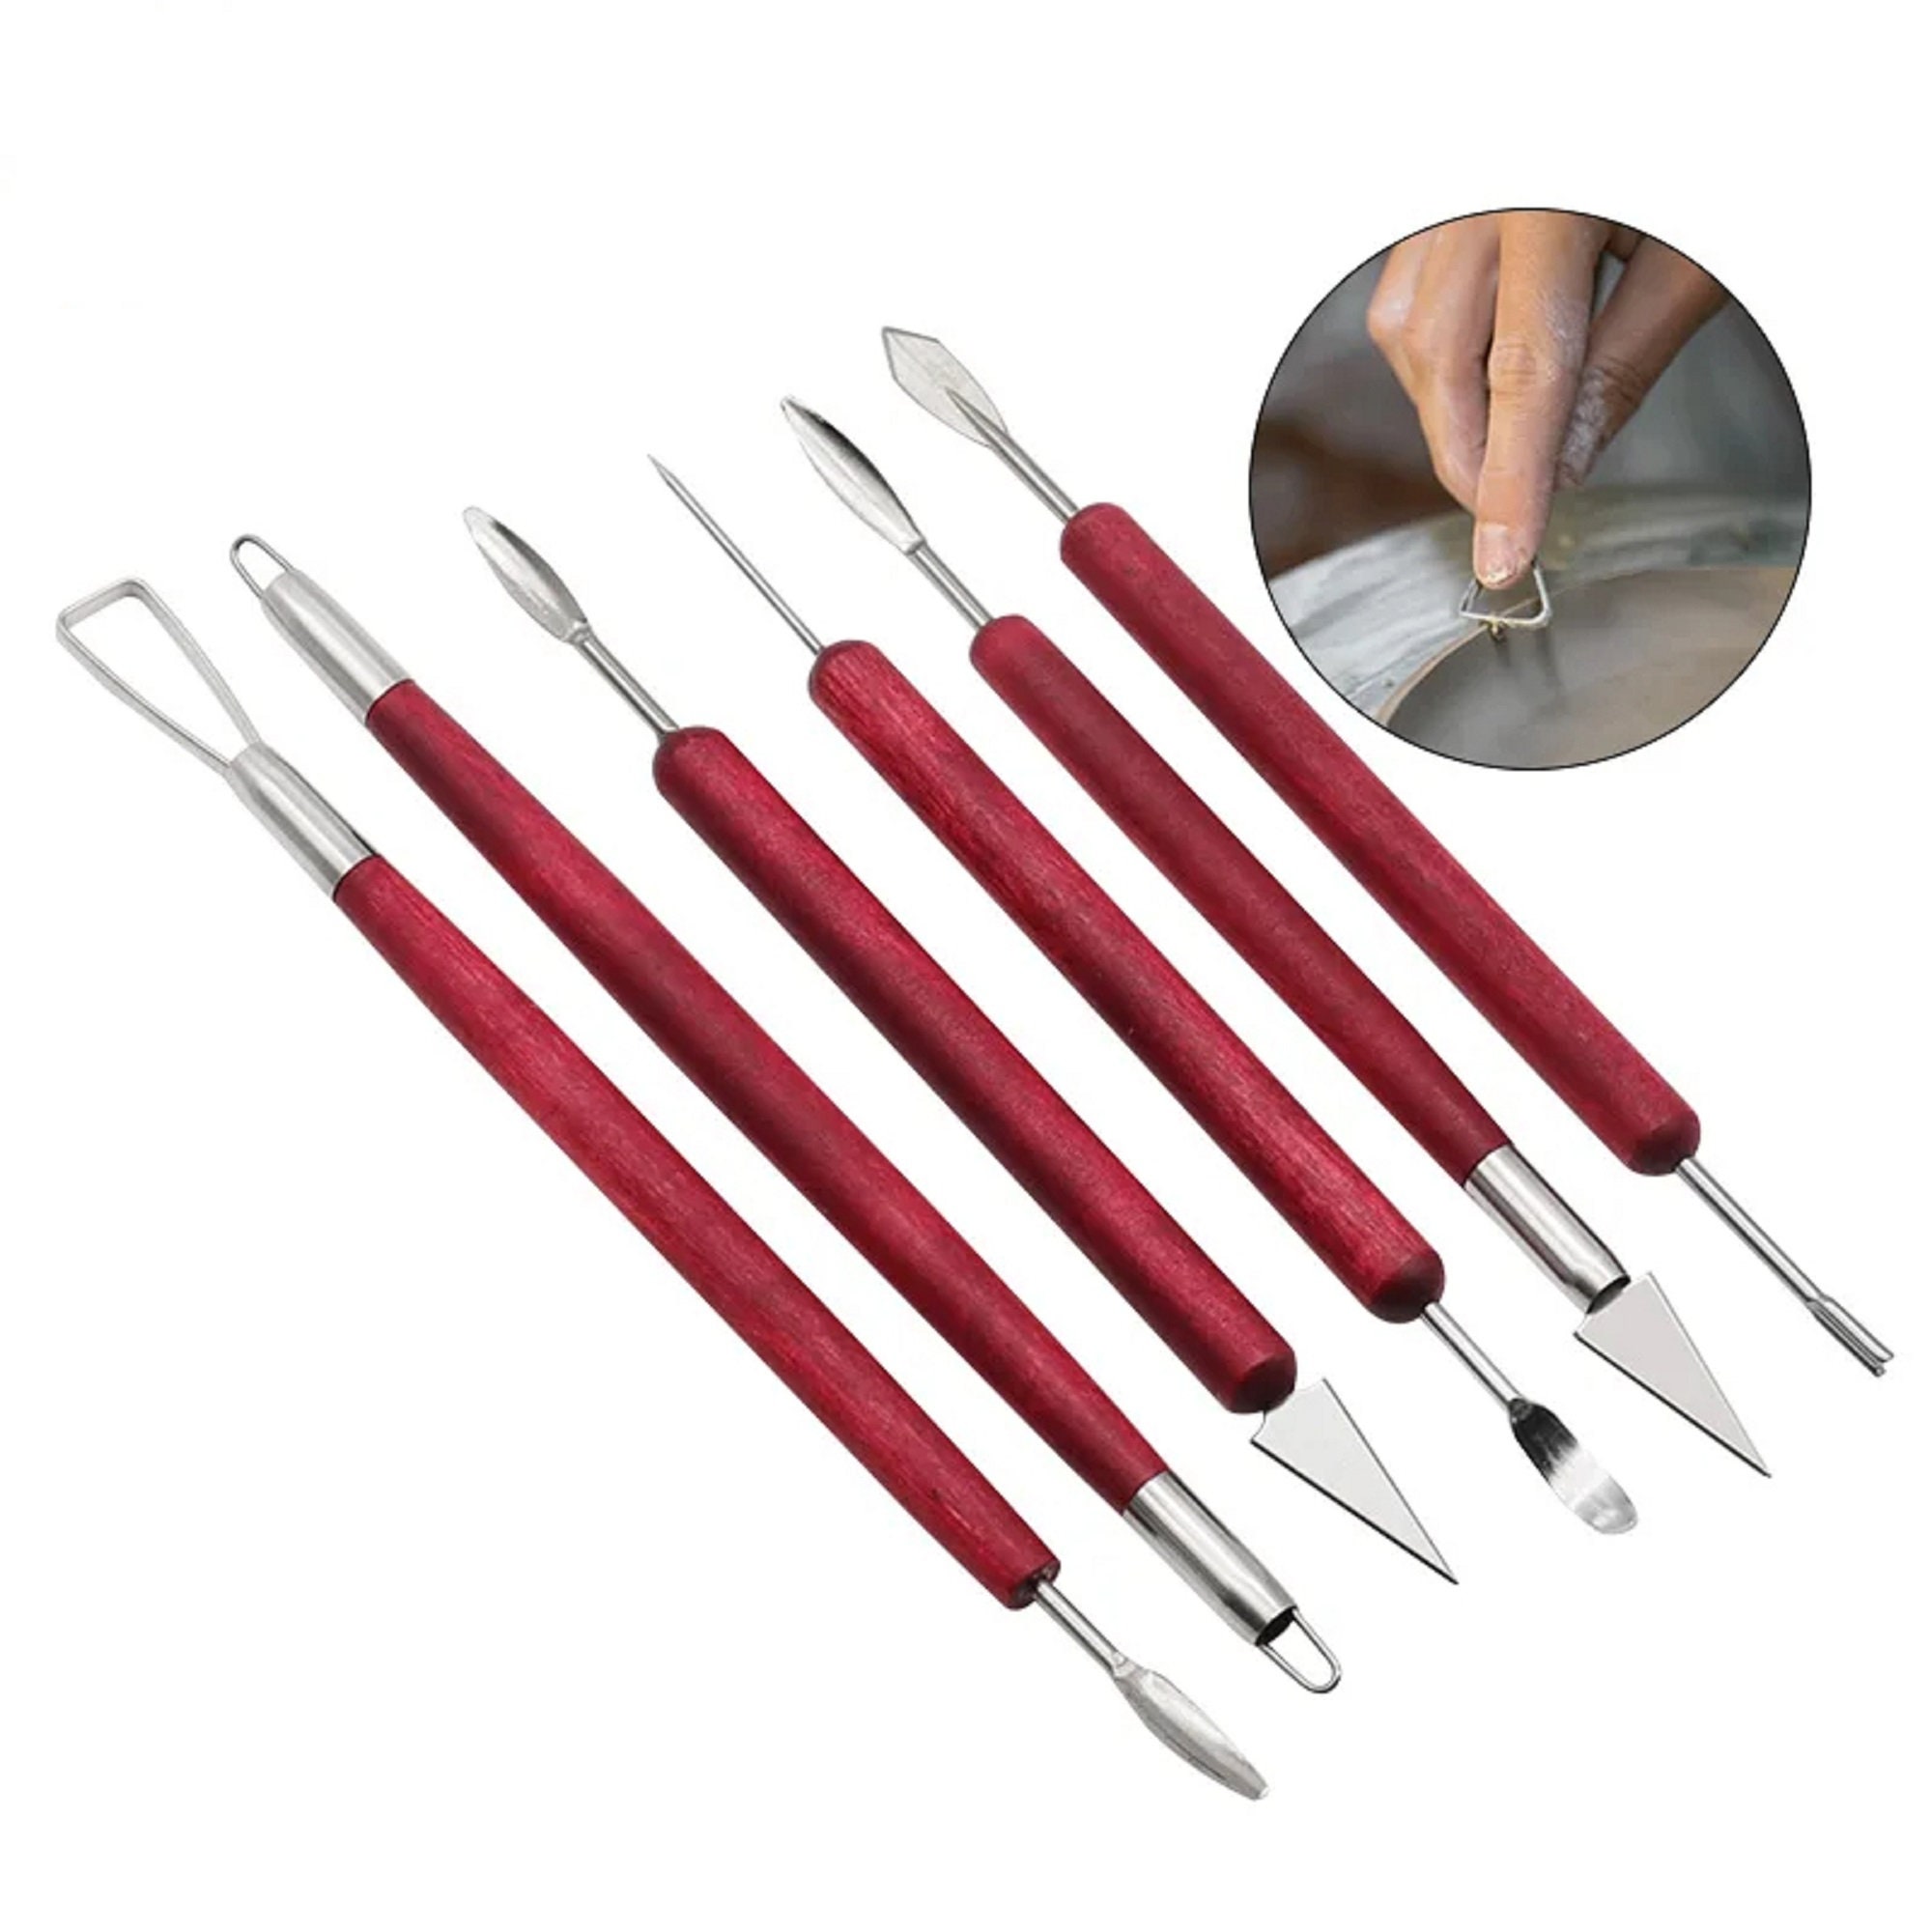 Set of 5 Double-ended Silicone Shaping and Ball Stylus Tools. Sculpting and  Shaping Tools for Pottery, Ceramics, and Clay. 